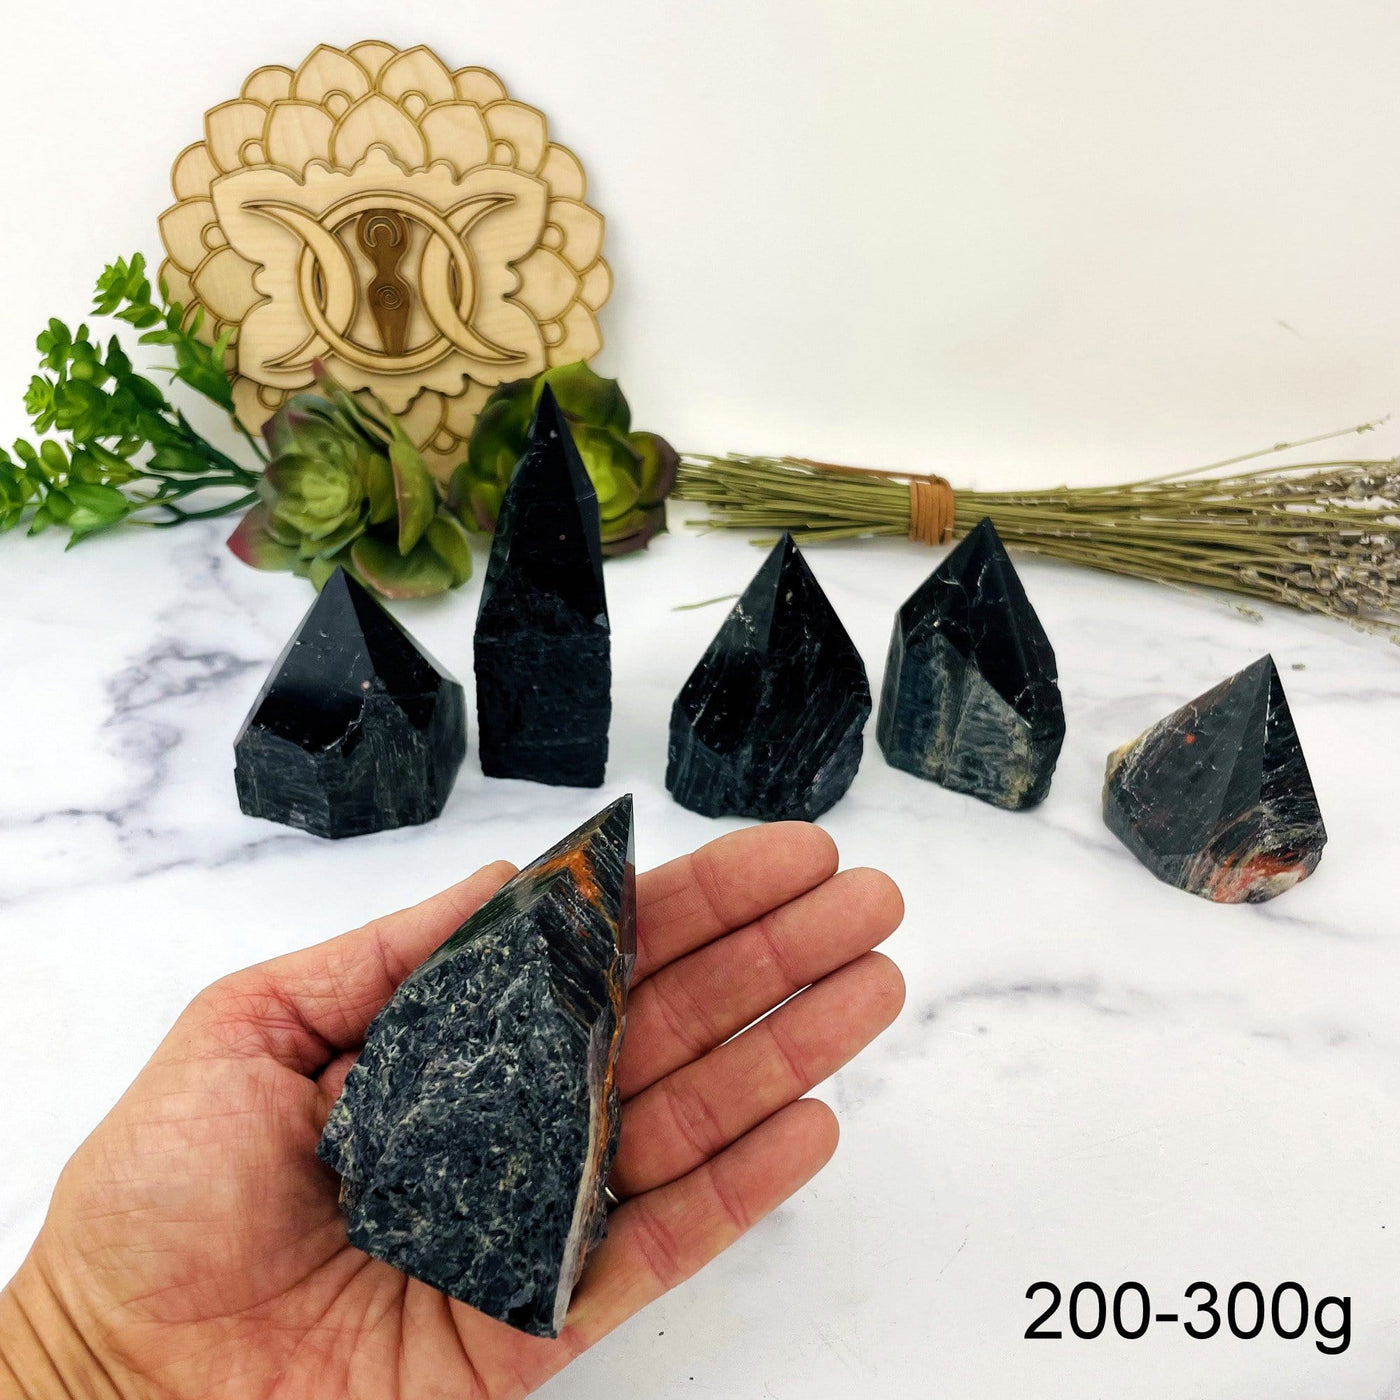 Black Tourmaline with Red Hematite Veins Semi Polished Points weight in 200-300g in hand for size reference